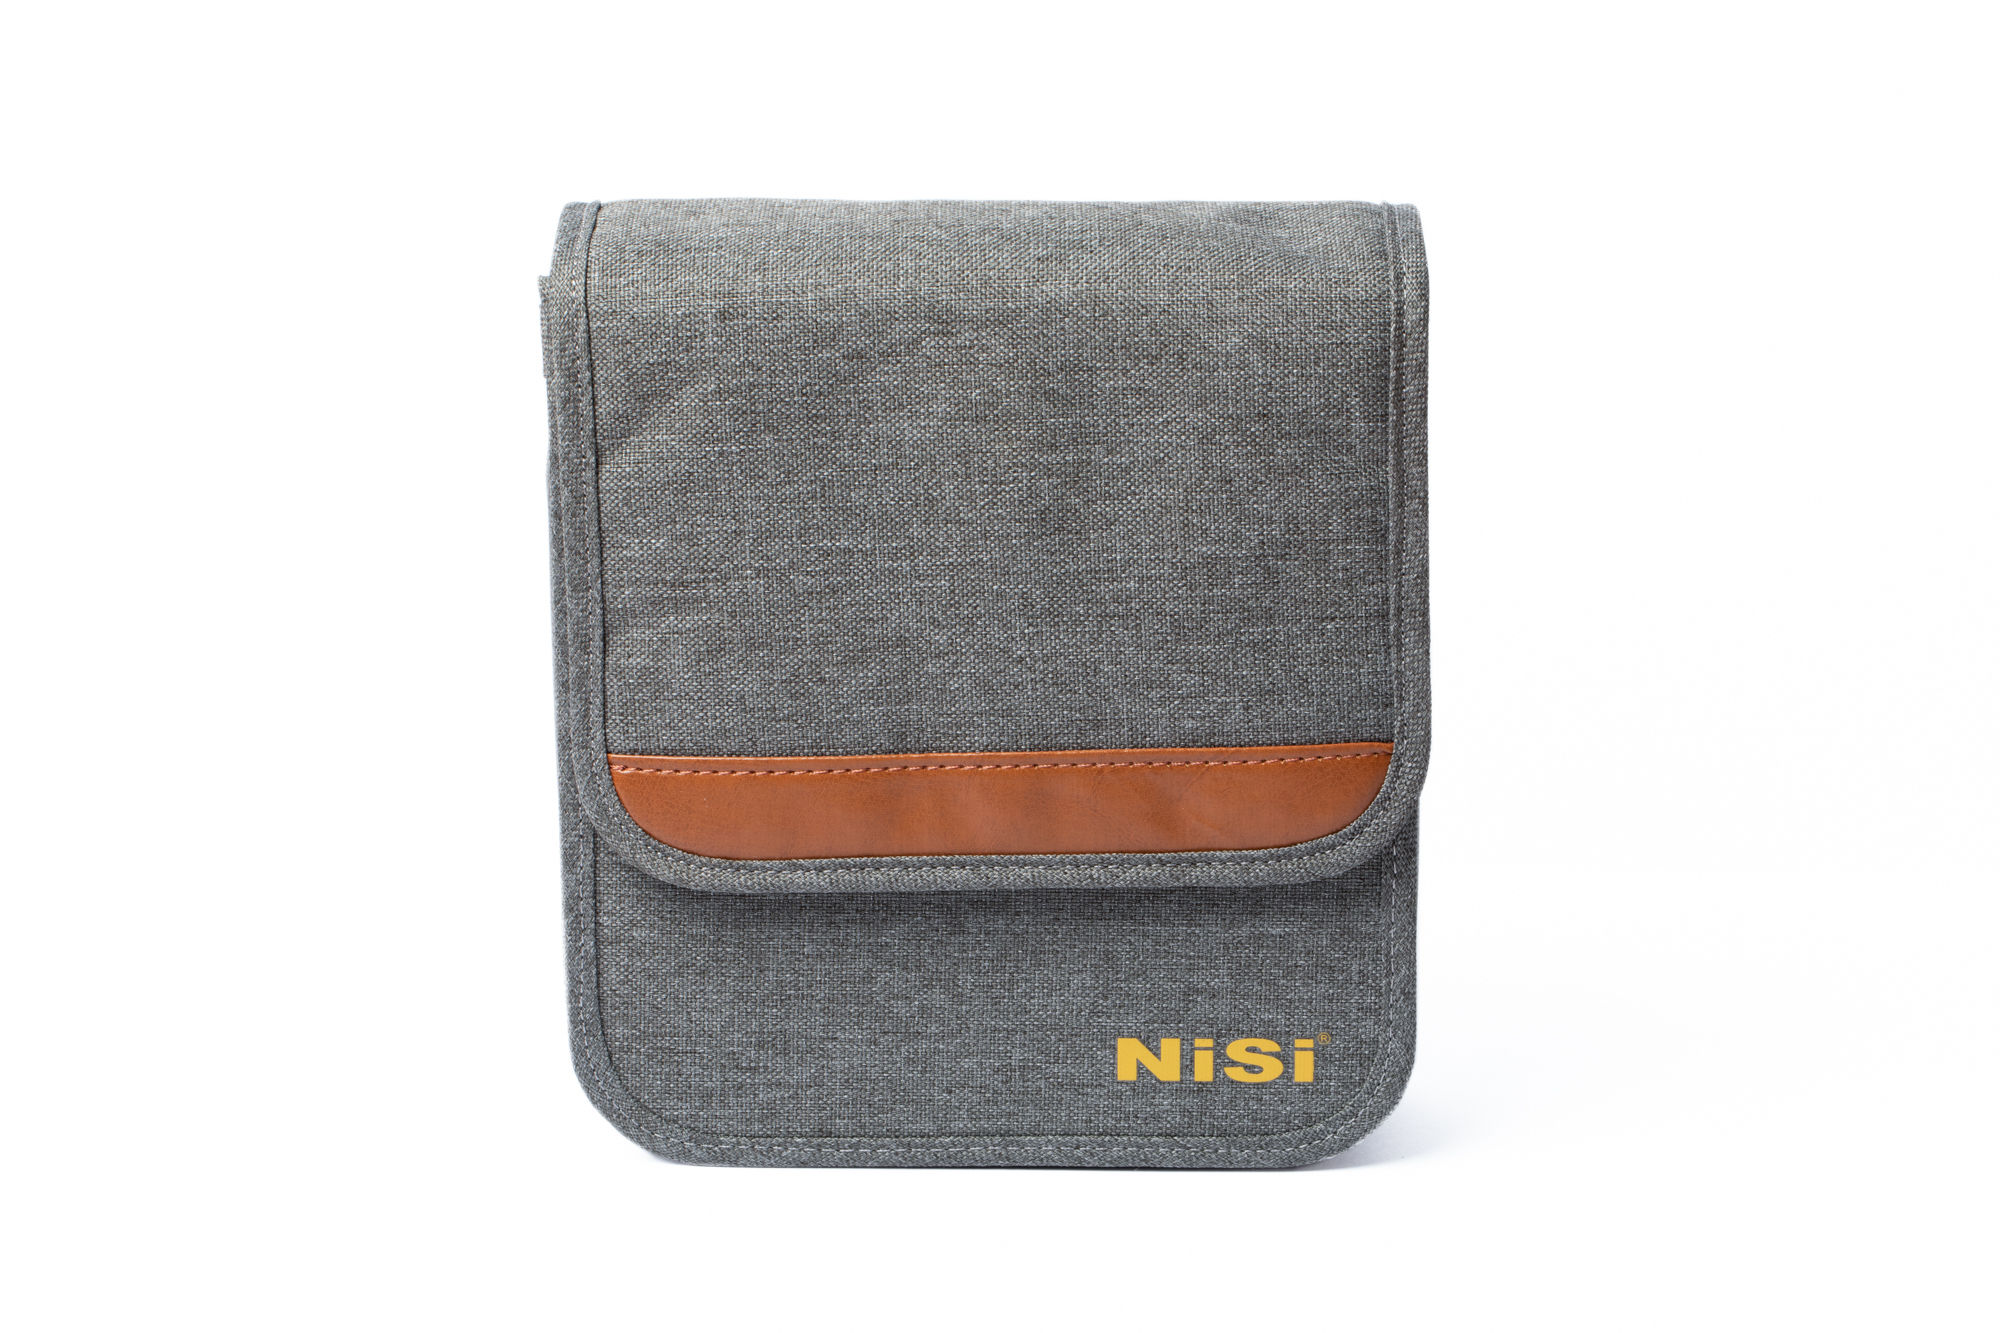 NiSi S6 150mm Filter Holder Kit with True Color NC CPL for Sigma